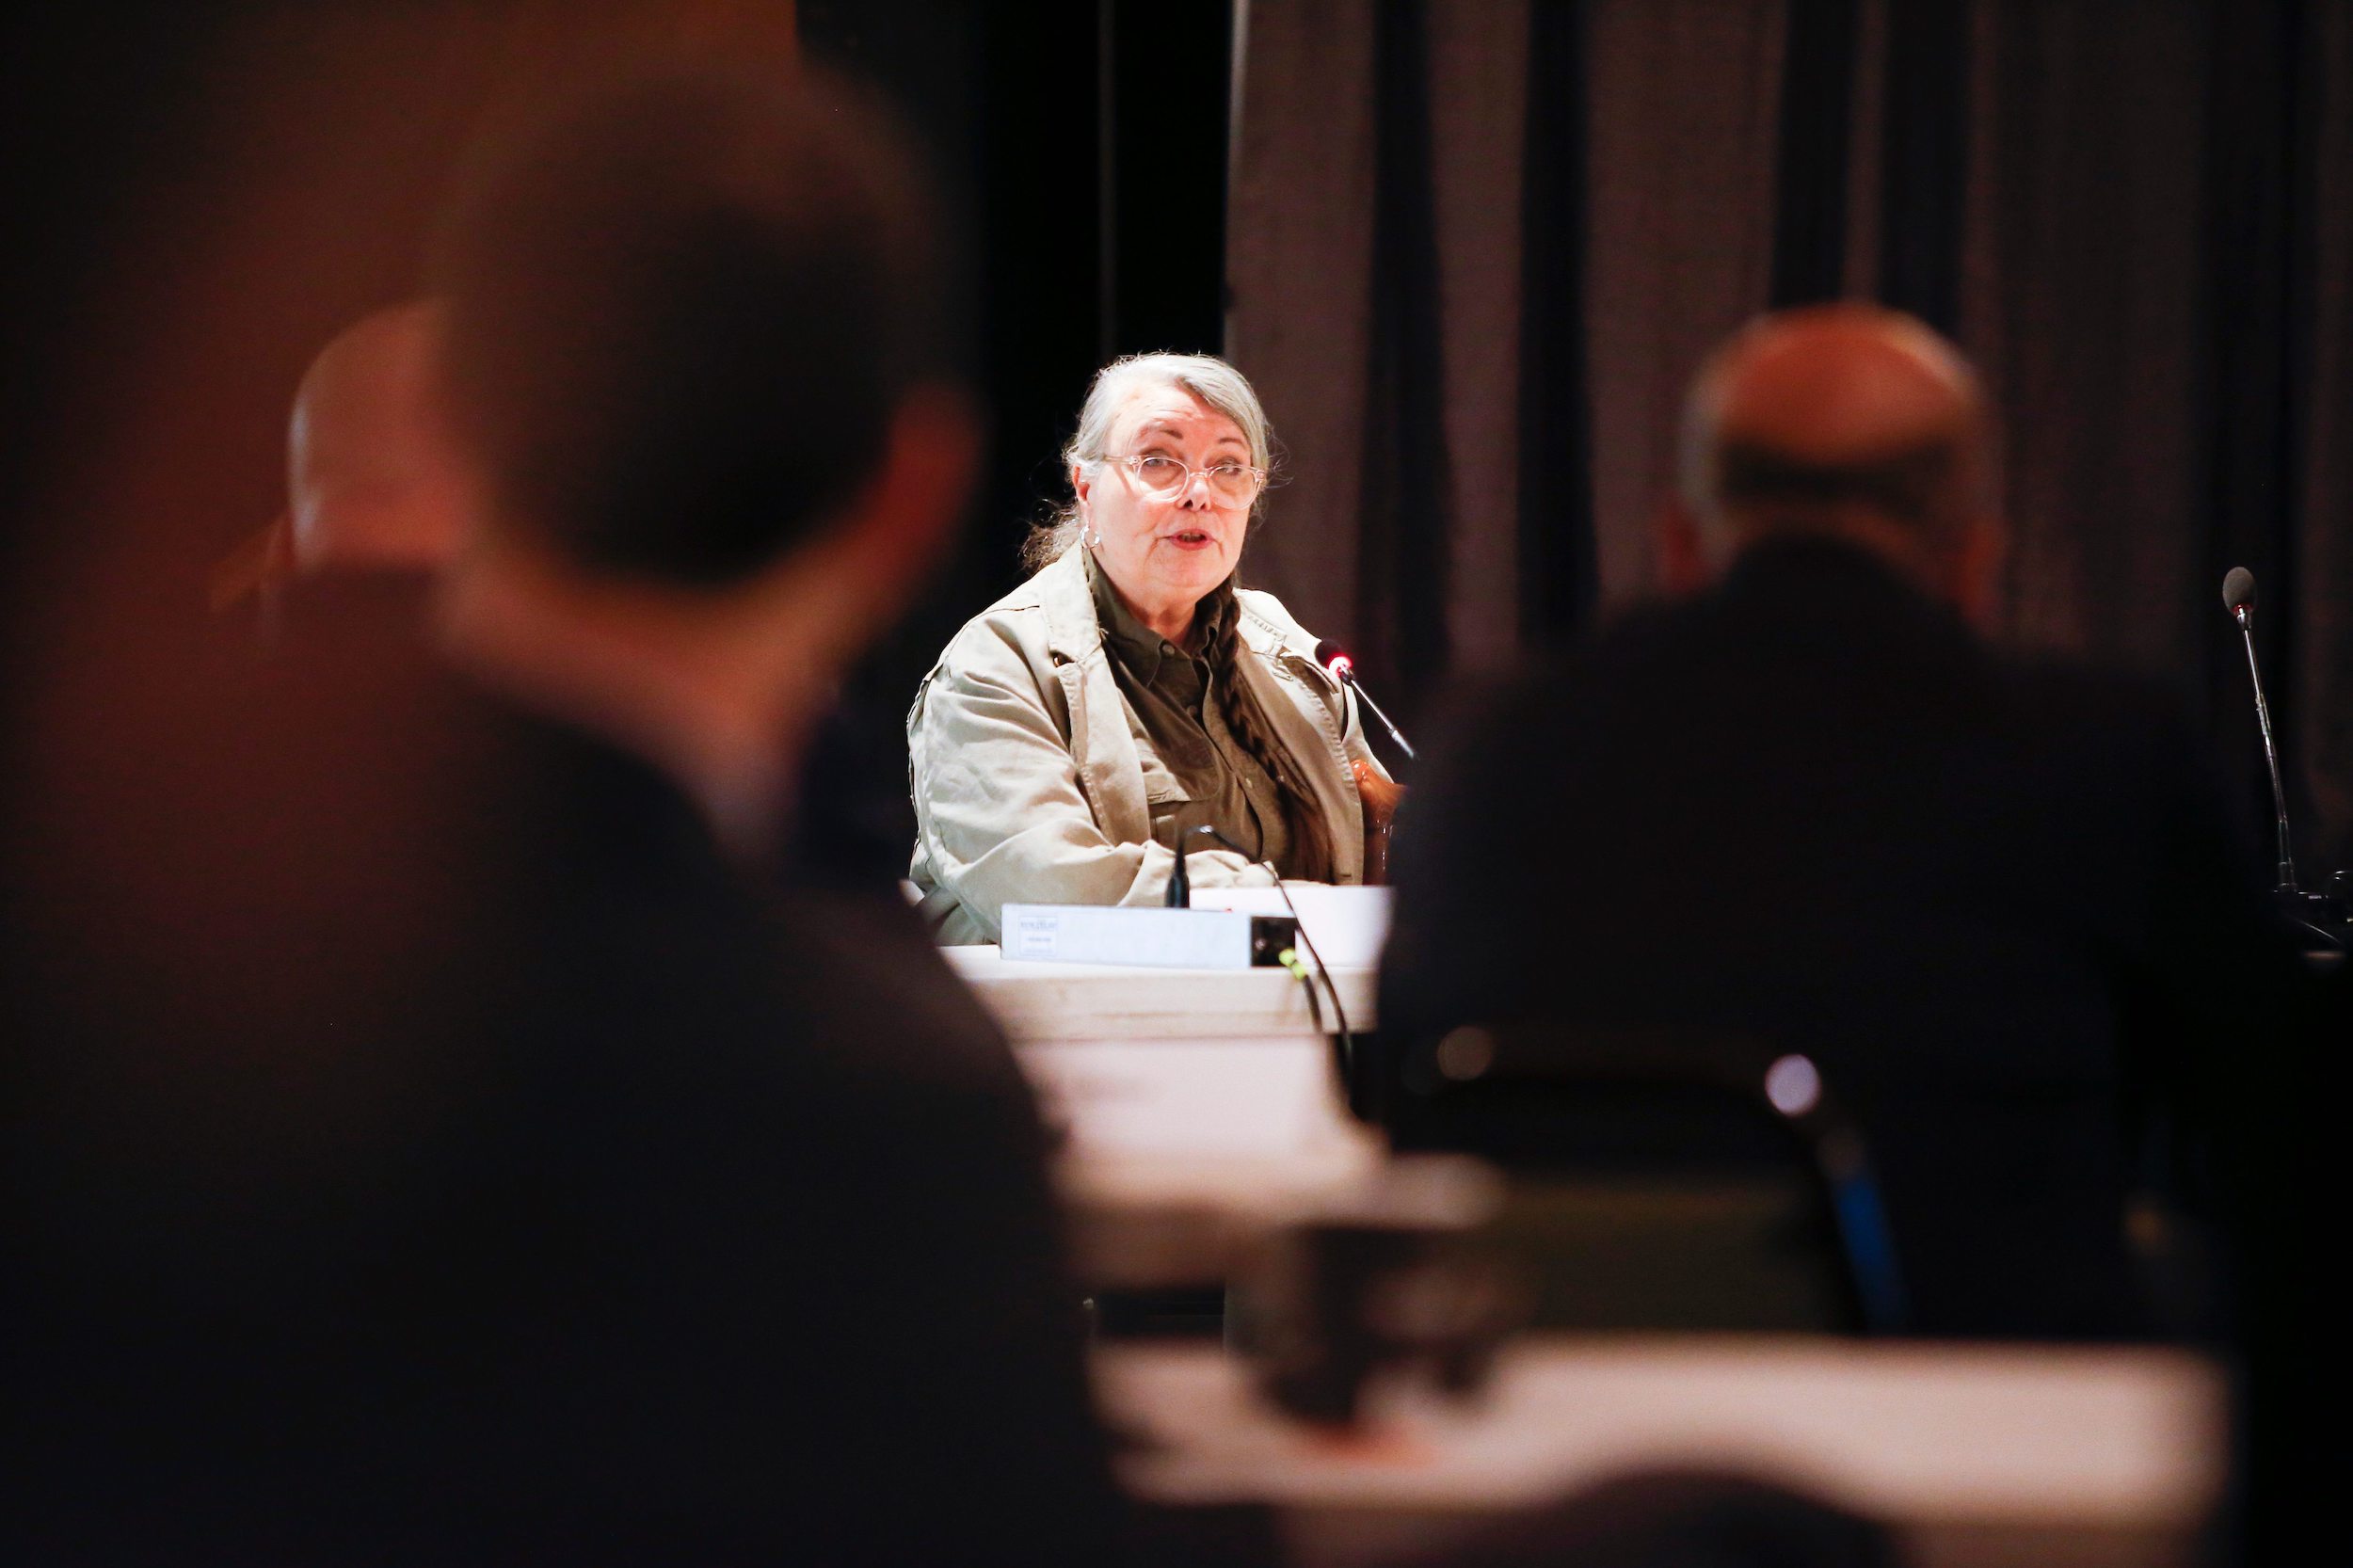 A resident wearing green clothing and glasses speaks during clean environment commission hearings in Steinbach, Manitoba